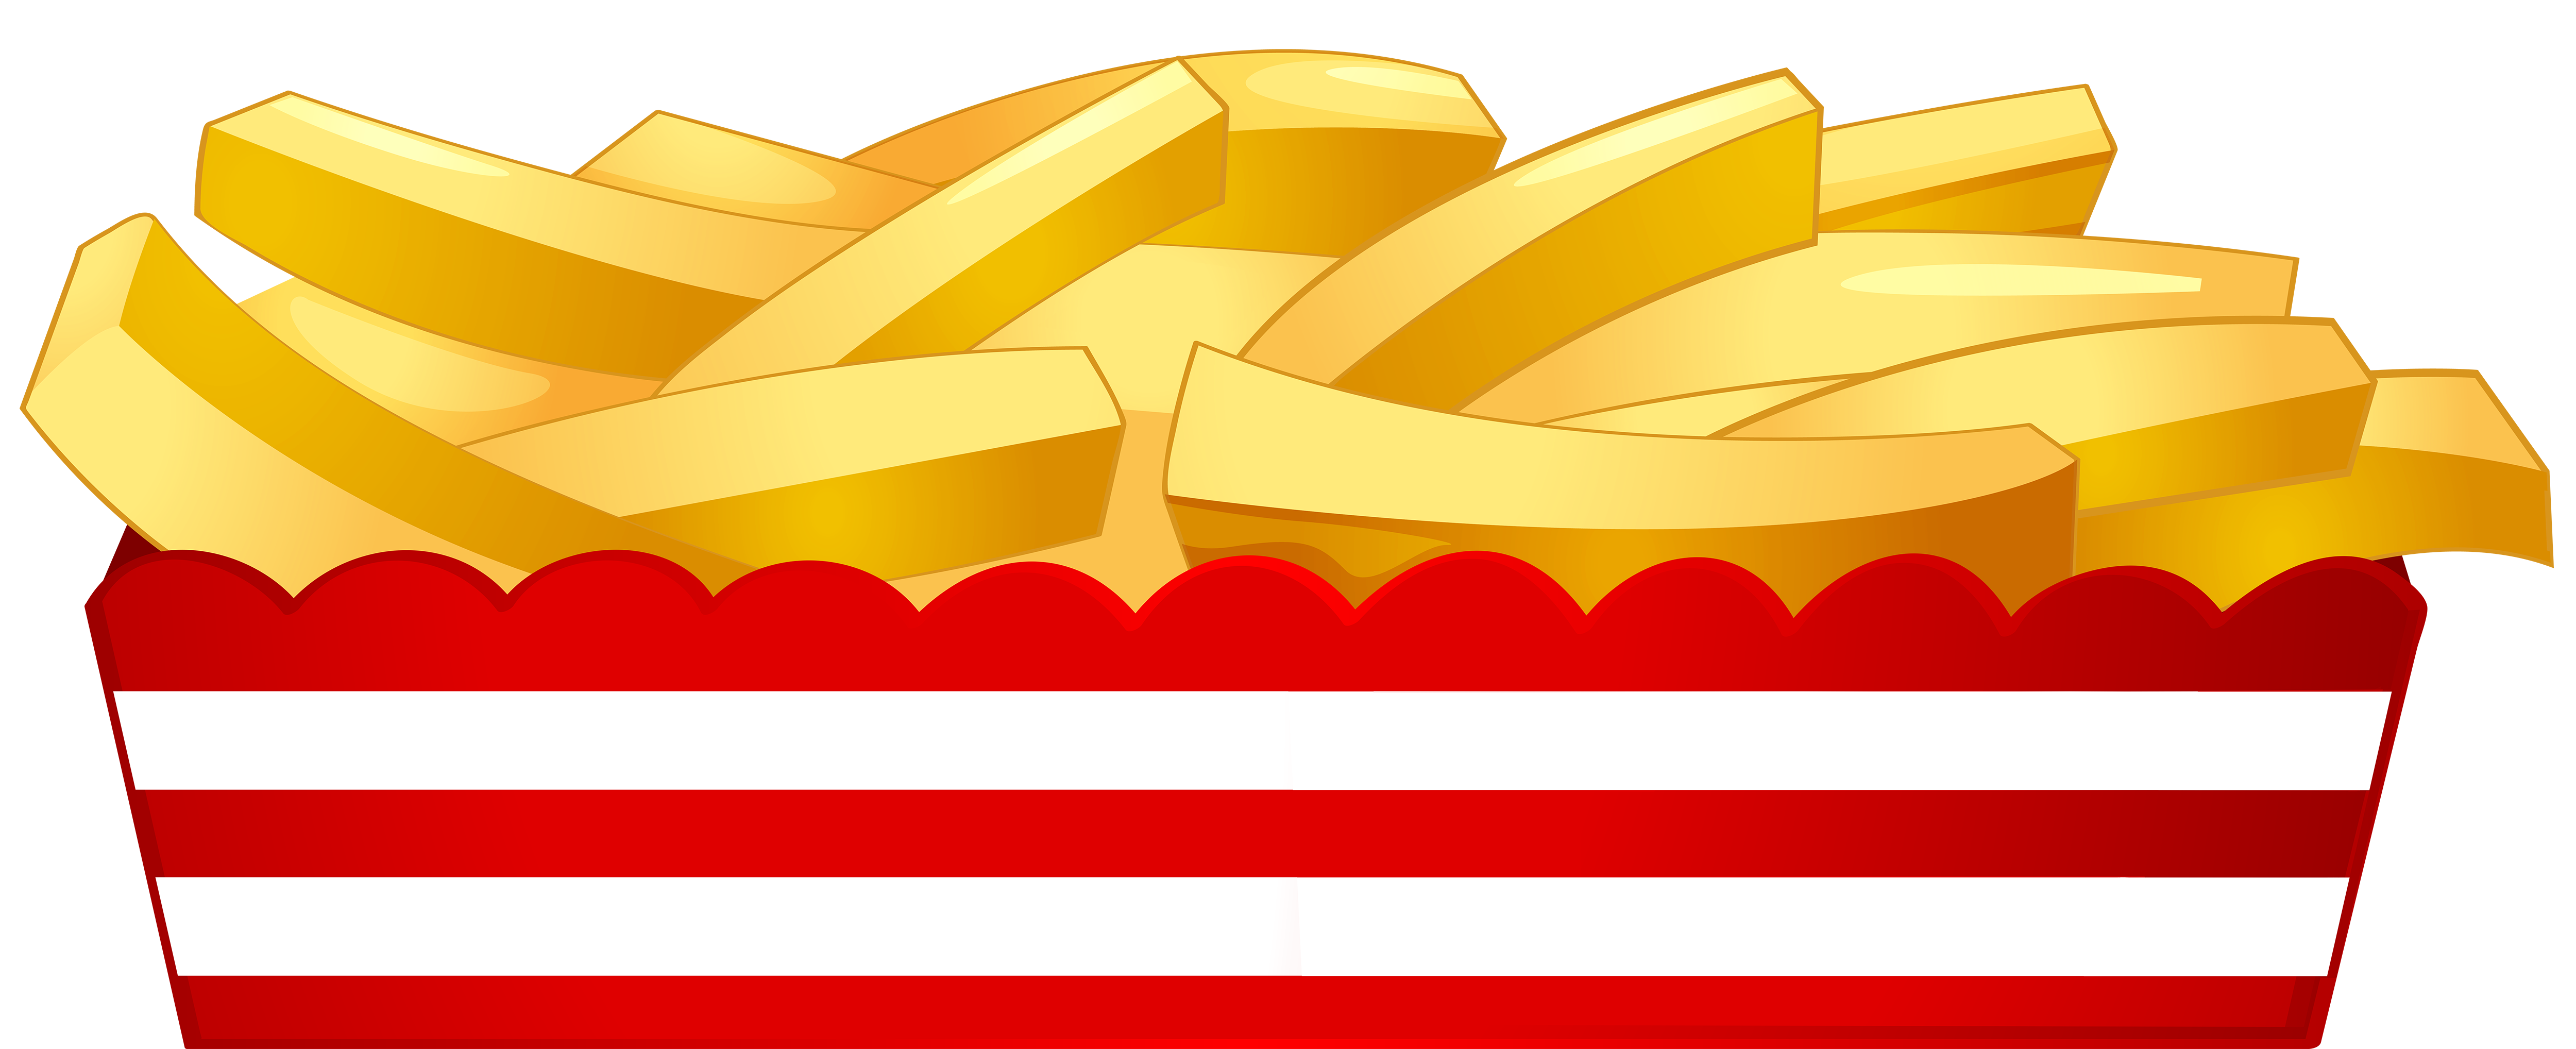 French fry clipart free - Cli - French Fries Clip Art